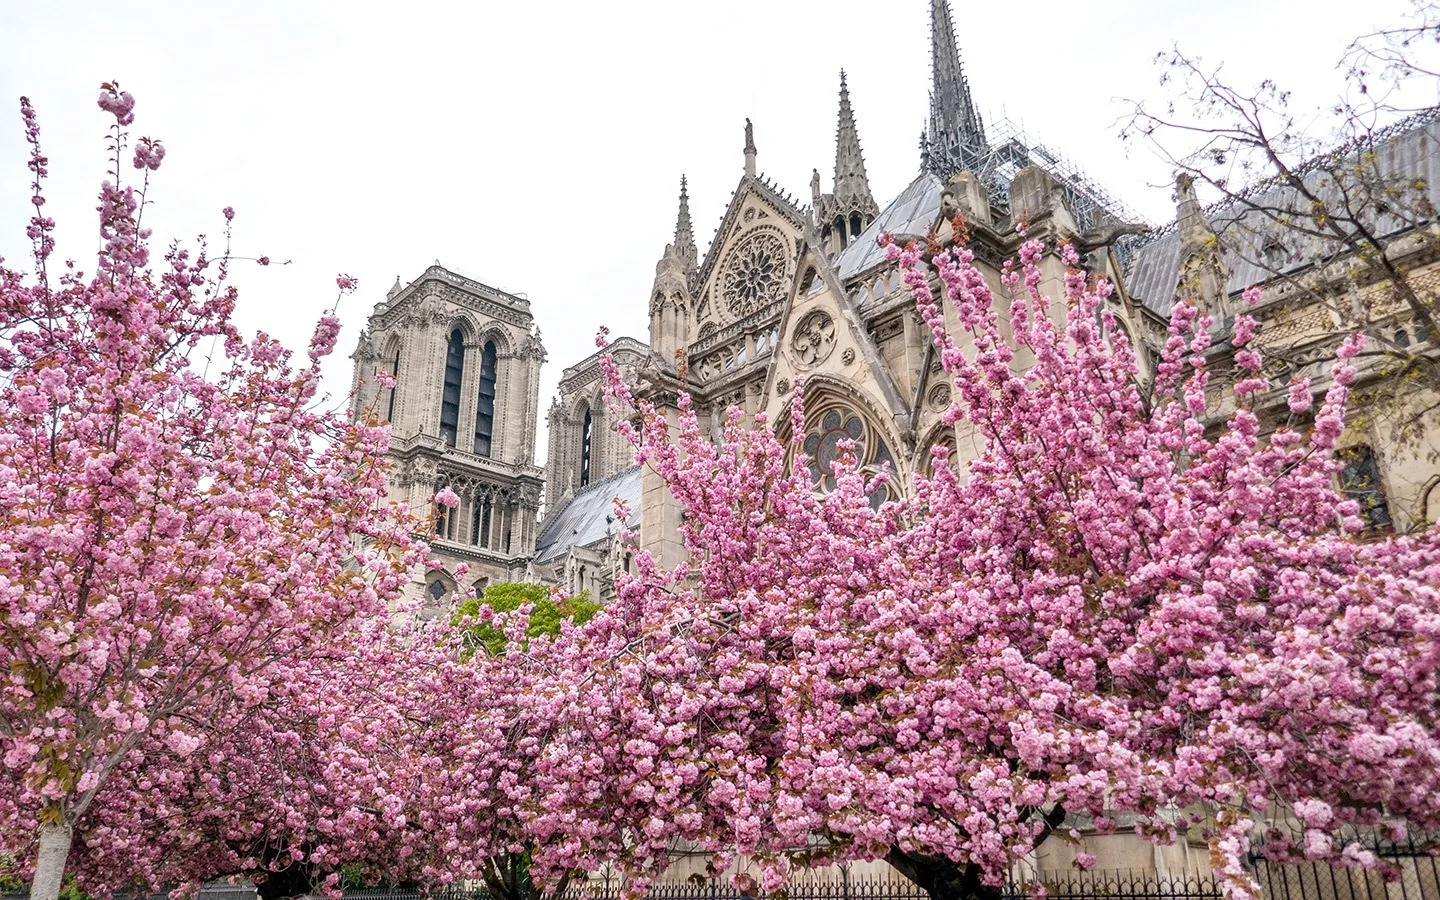 Cherry blossoms at Notre Dame cathedral